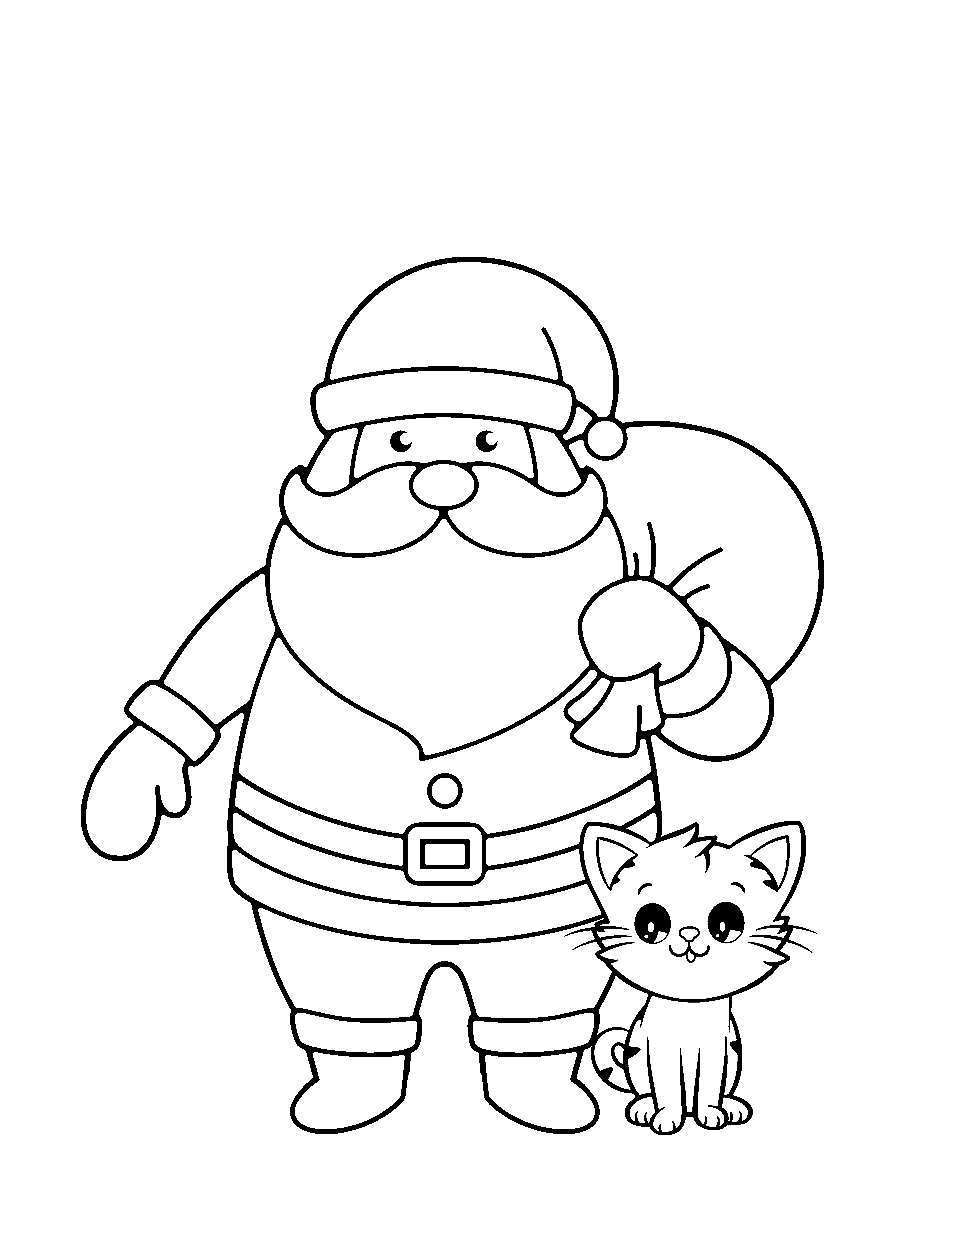 Santa and a Cat Coloring Page - Santa with a friendly cat standing together.